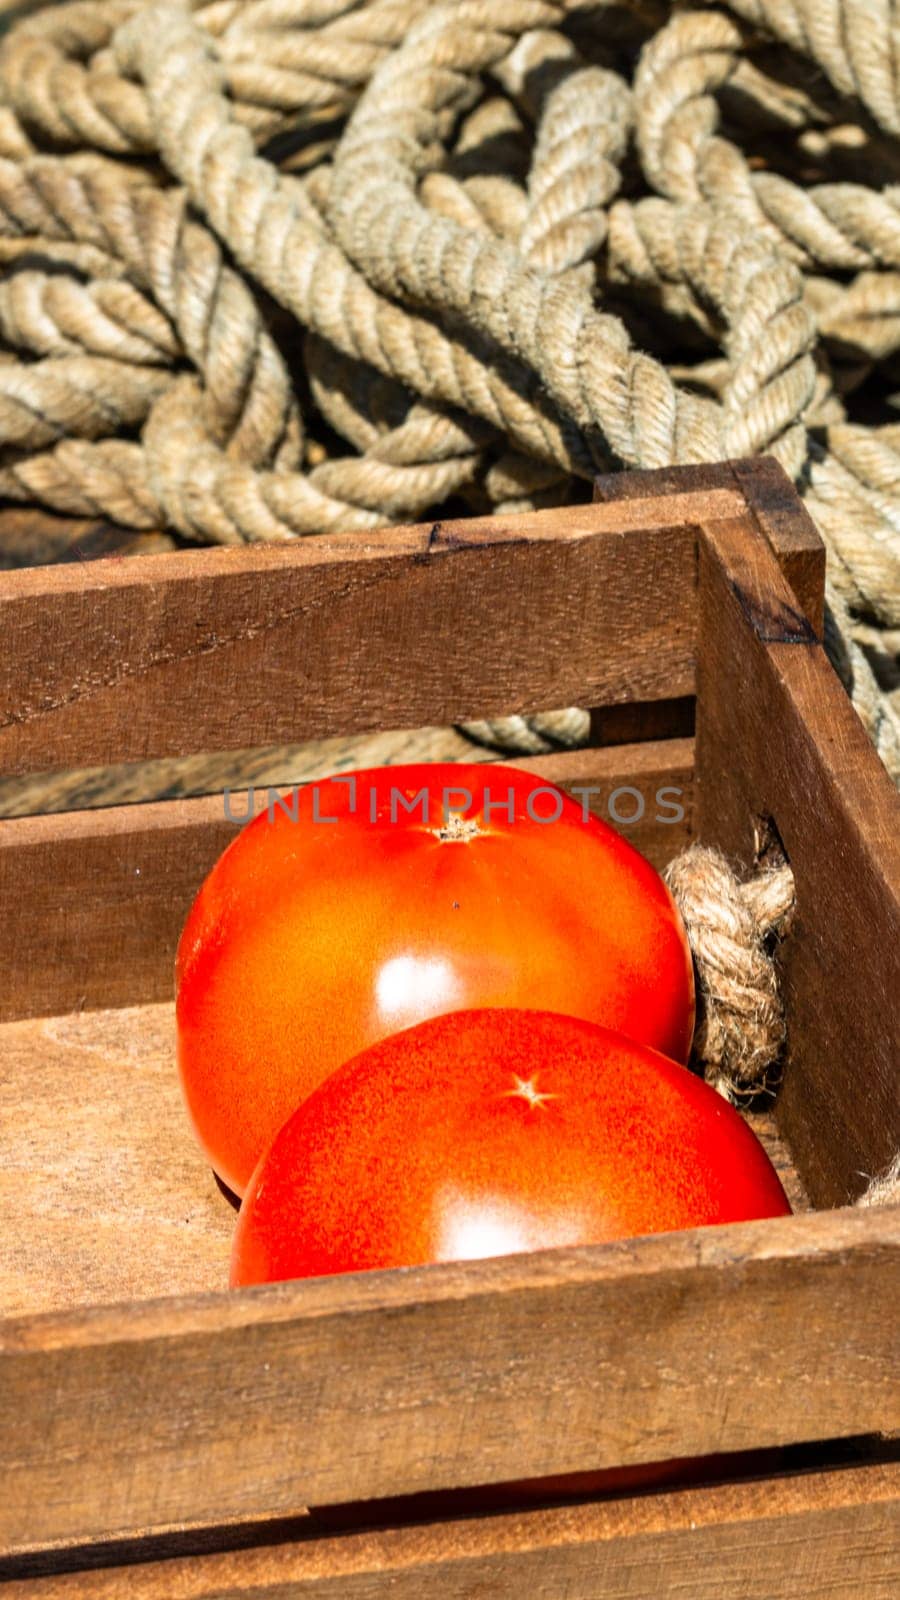 Wooden crate with fresh ripe tomatoes isolated in a rustic composition, by vladispas